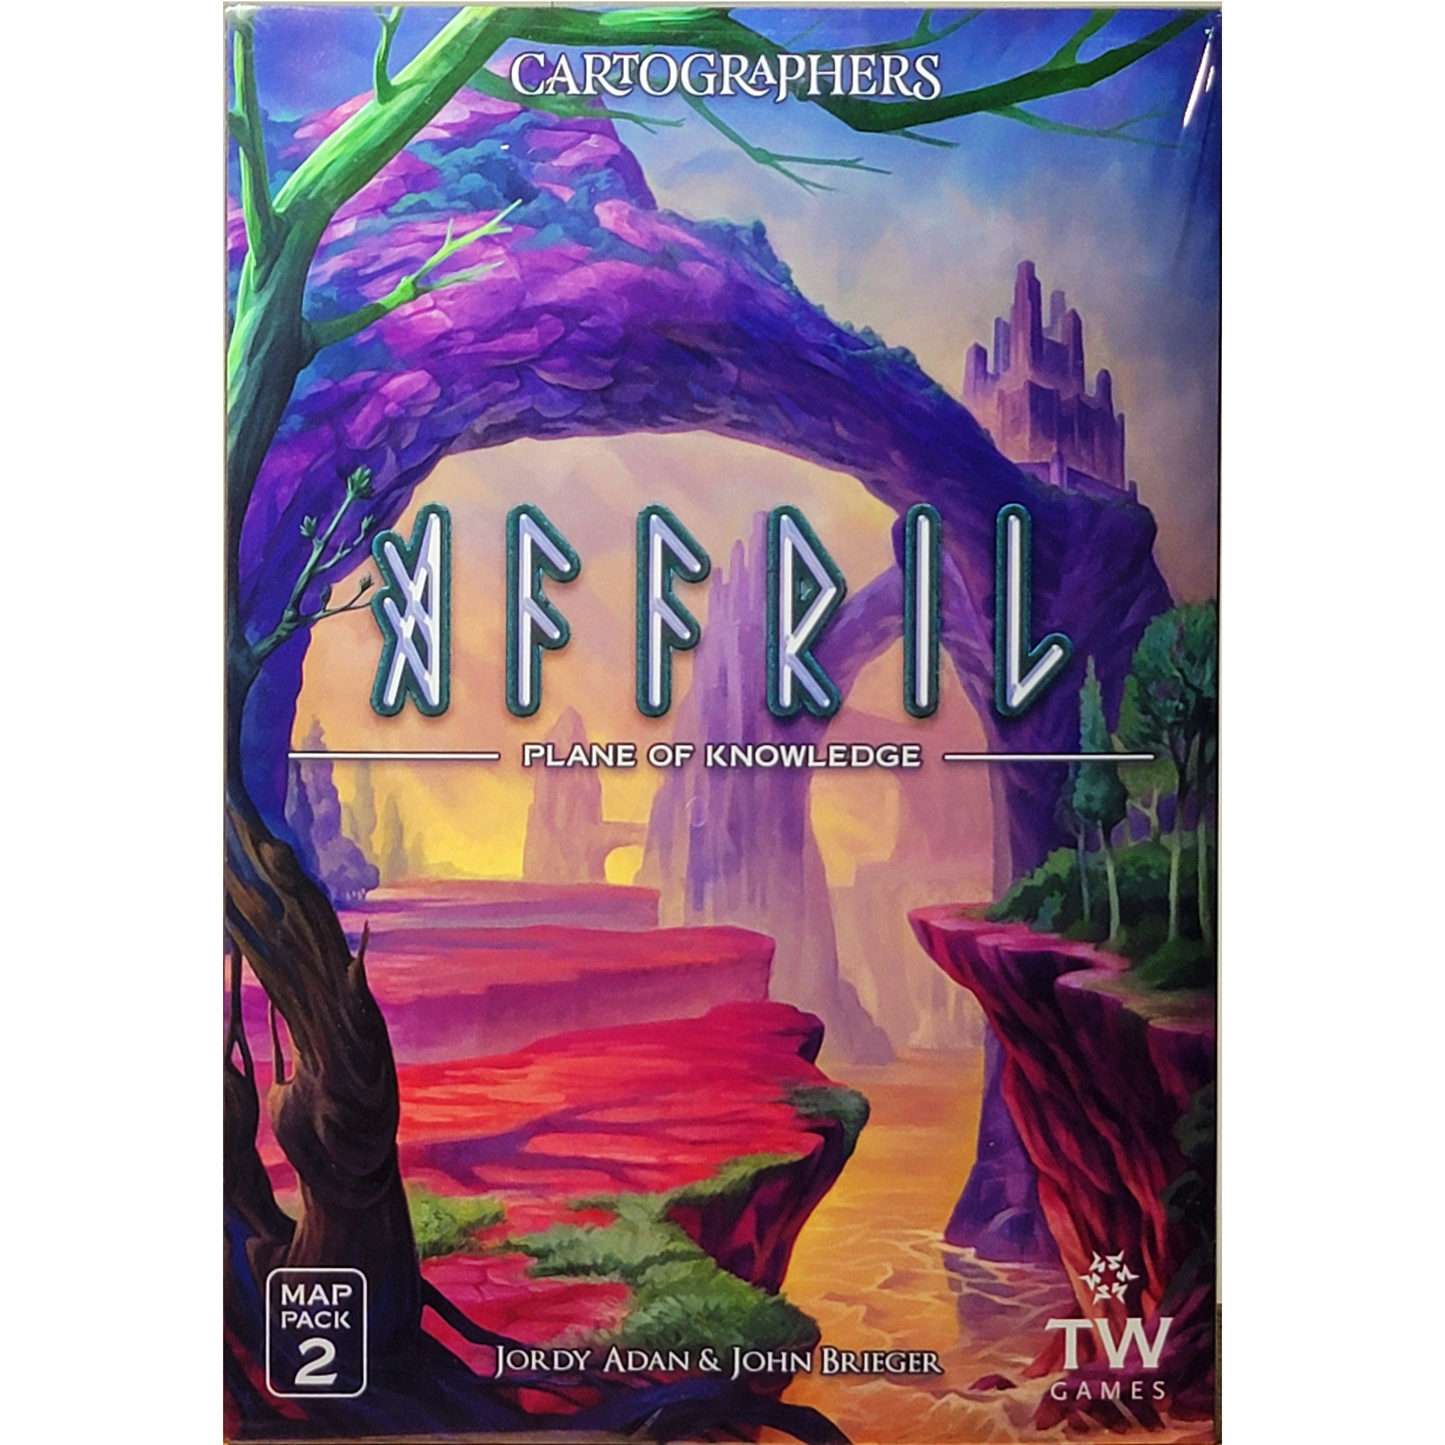 Cartographers Nebblis, Affril and Undercity Expansions pack